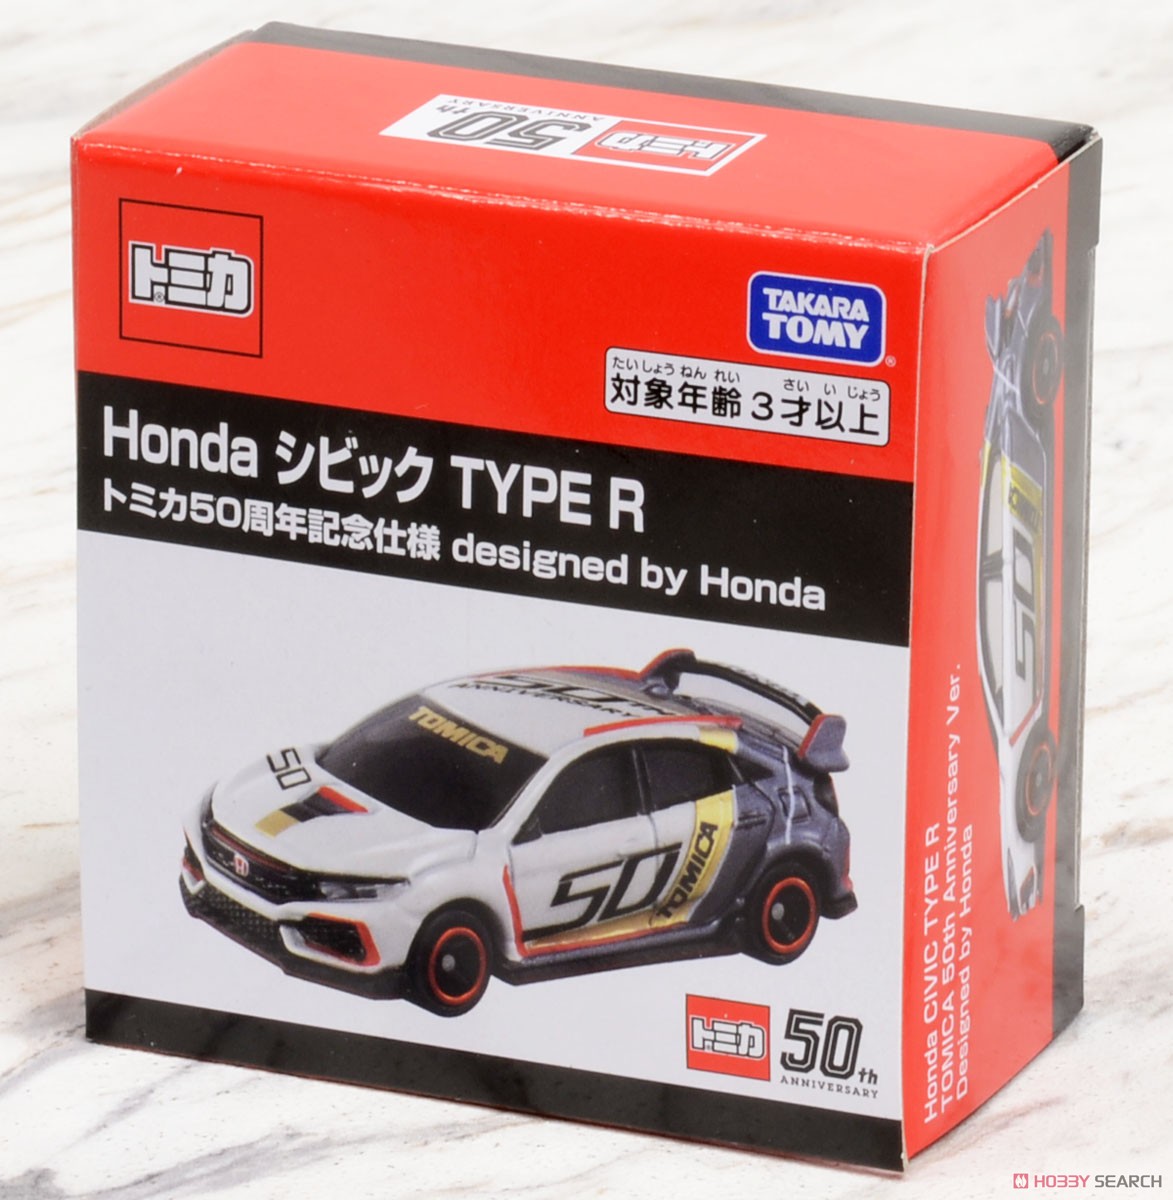 Honda Civic TypeR Tomica 50th Anniversary Designed by Honda (Tomica) Package1